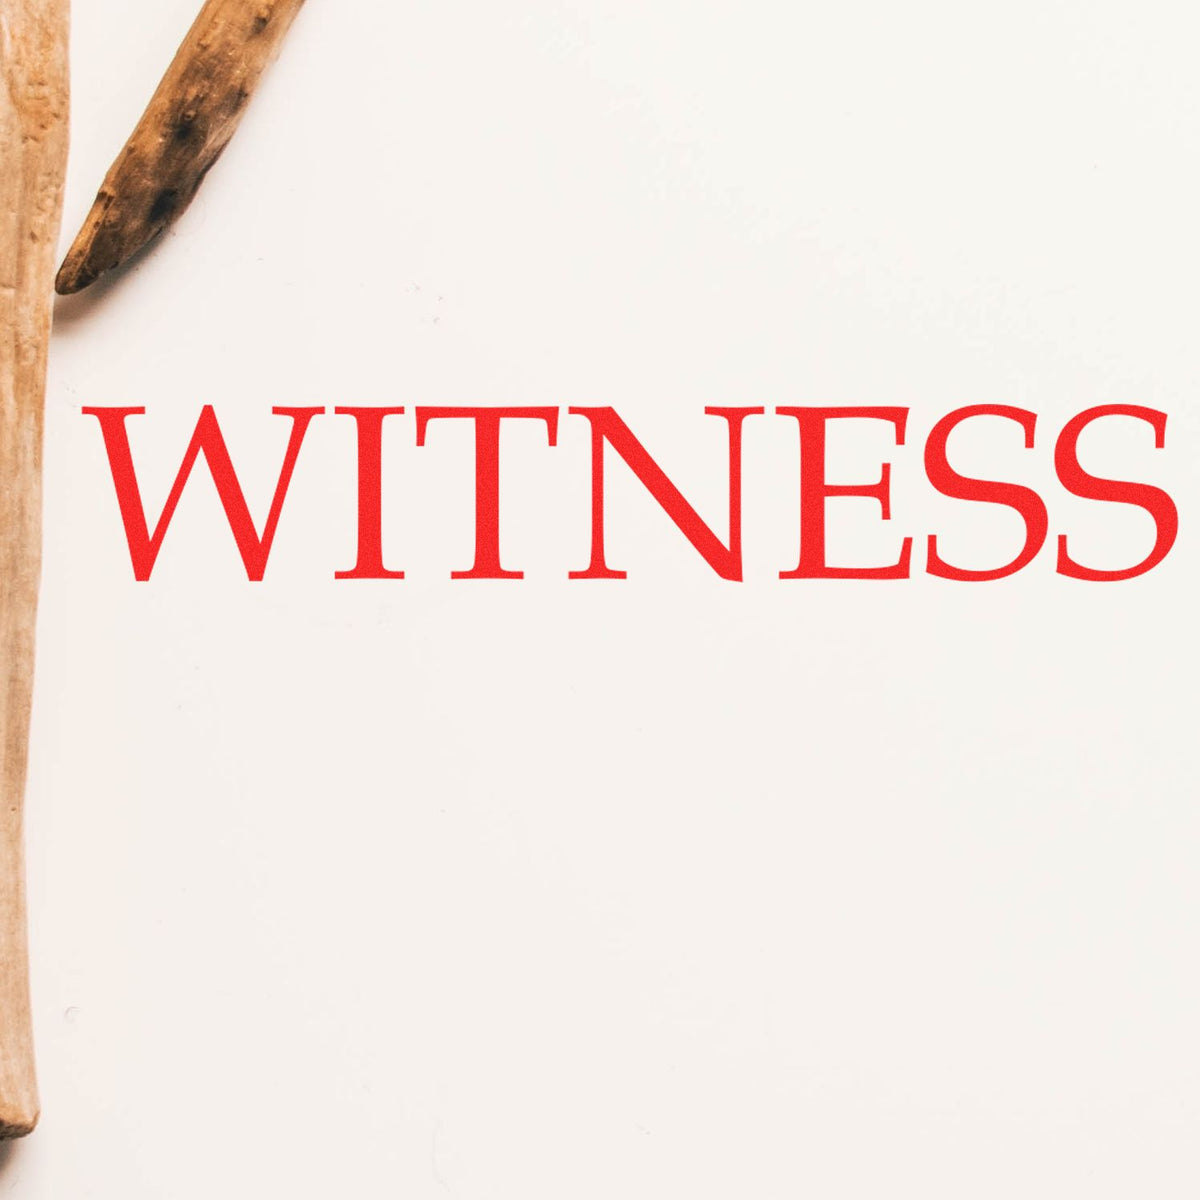 Large Witness Rubber Stamp In Use Photo